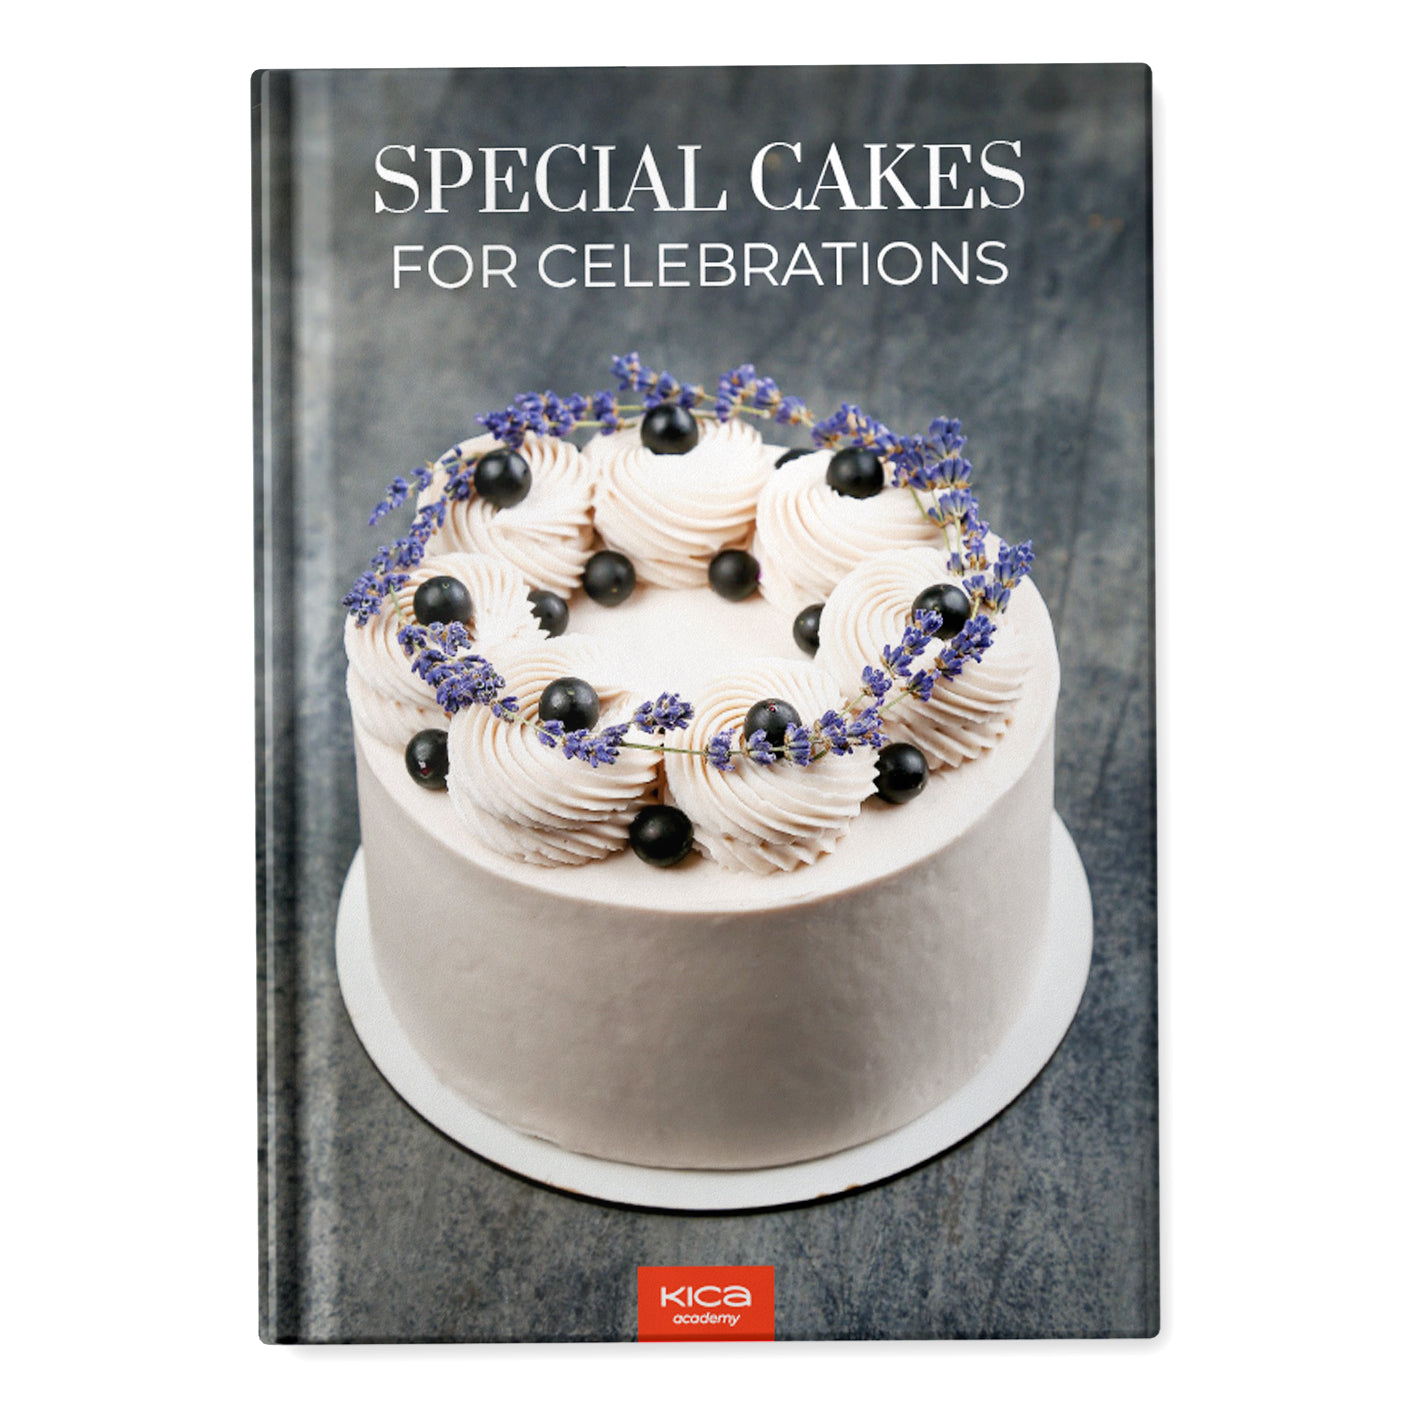 Special Cakes for Celebrations Cookbook